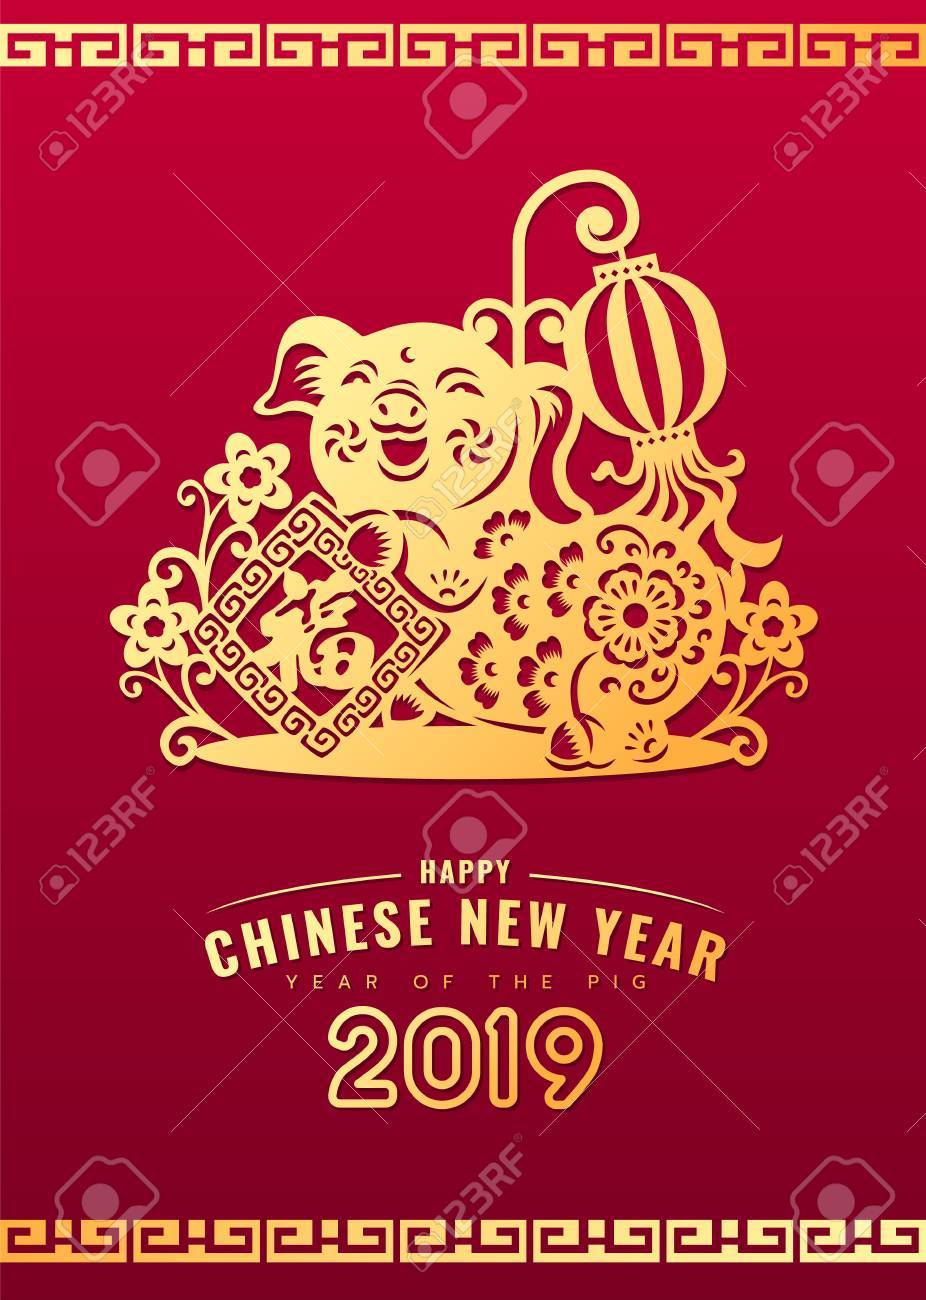 Holiday Notice: Chinese New Year 2019